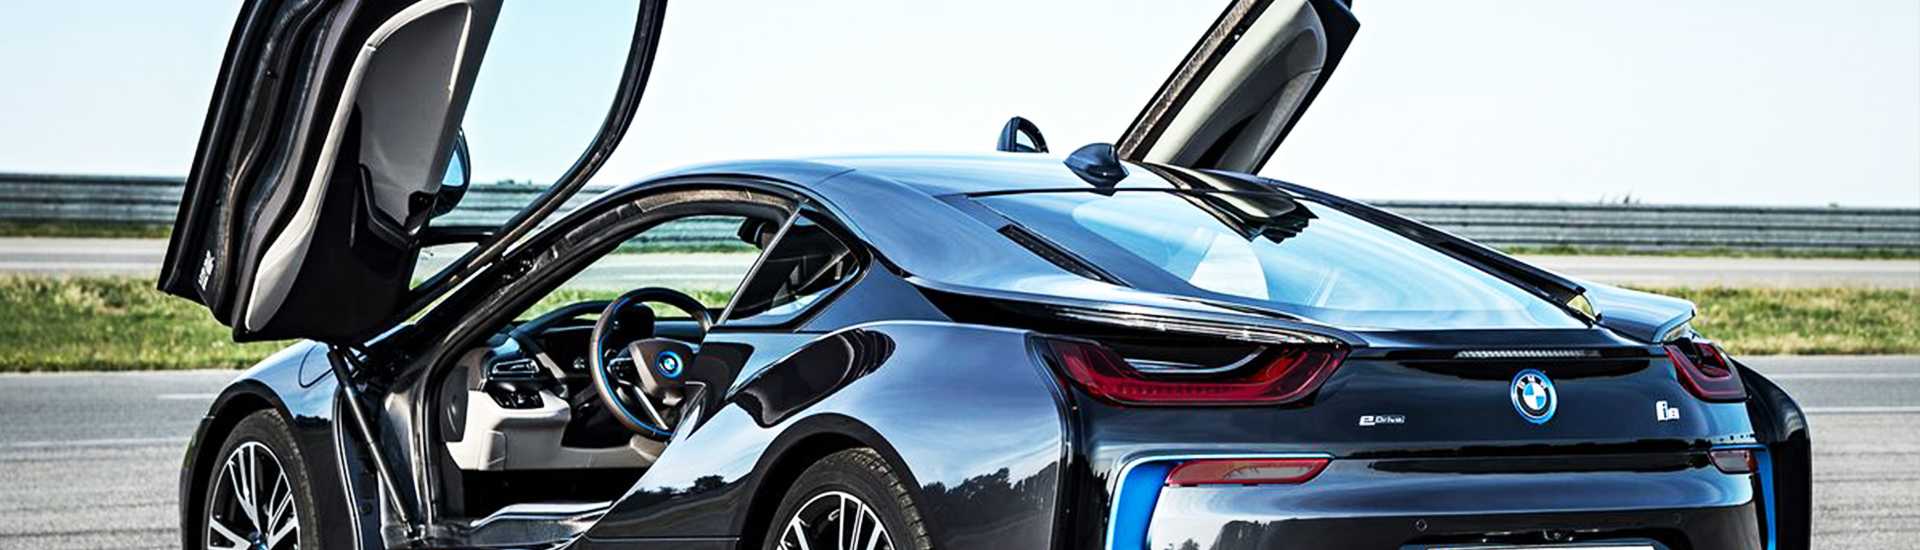 BMW i8 Tail Light Tint Covers